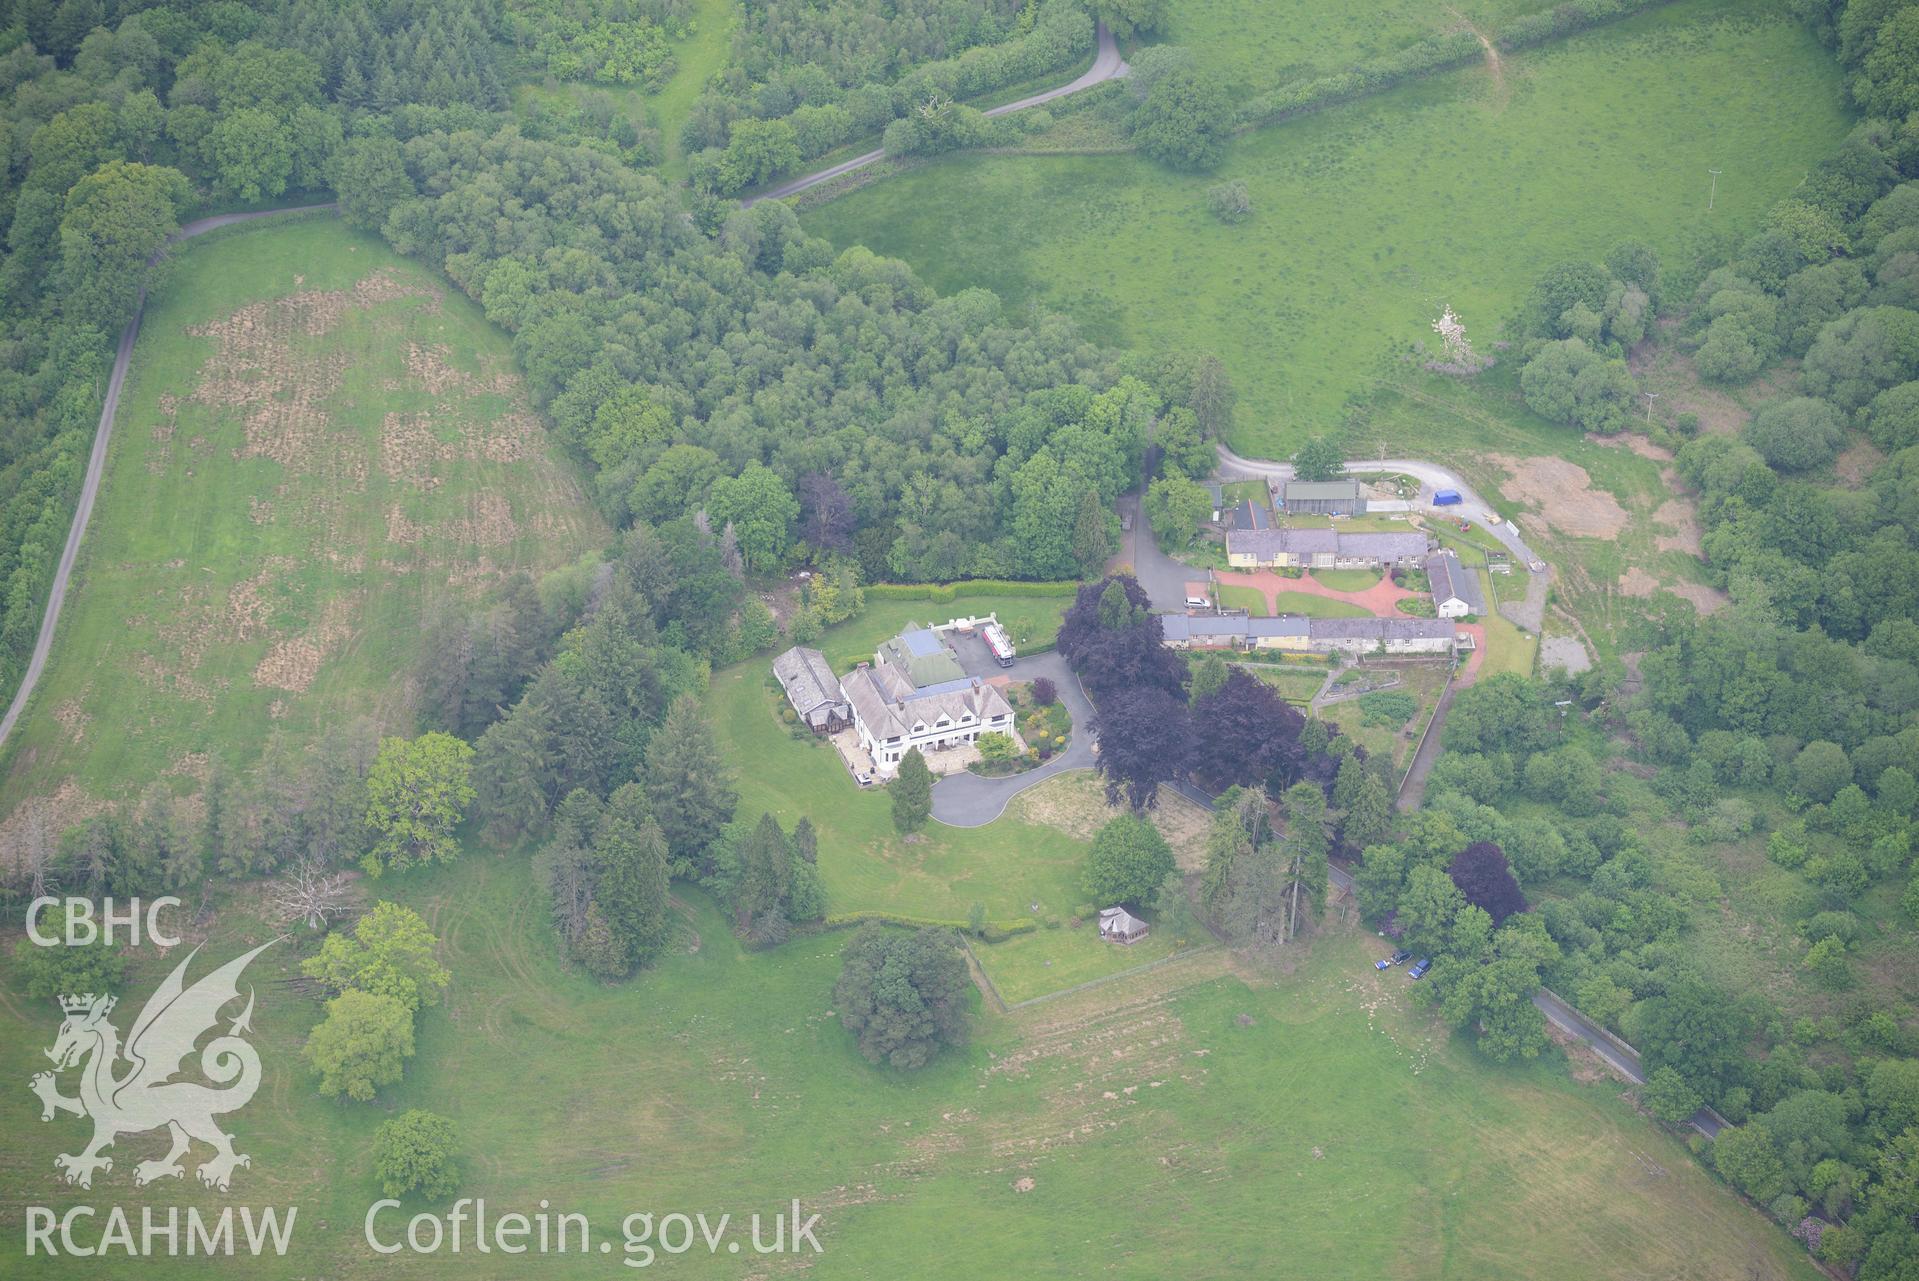 Upton Hall, Nantgaredig. Oblique aerial photograph taken during the Royal Commission's programme of archaeological aerial reconnaissance by Toby Driver on 11th June 2015.